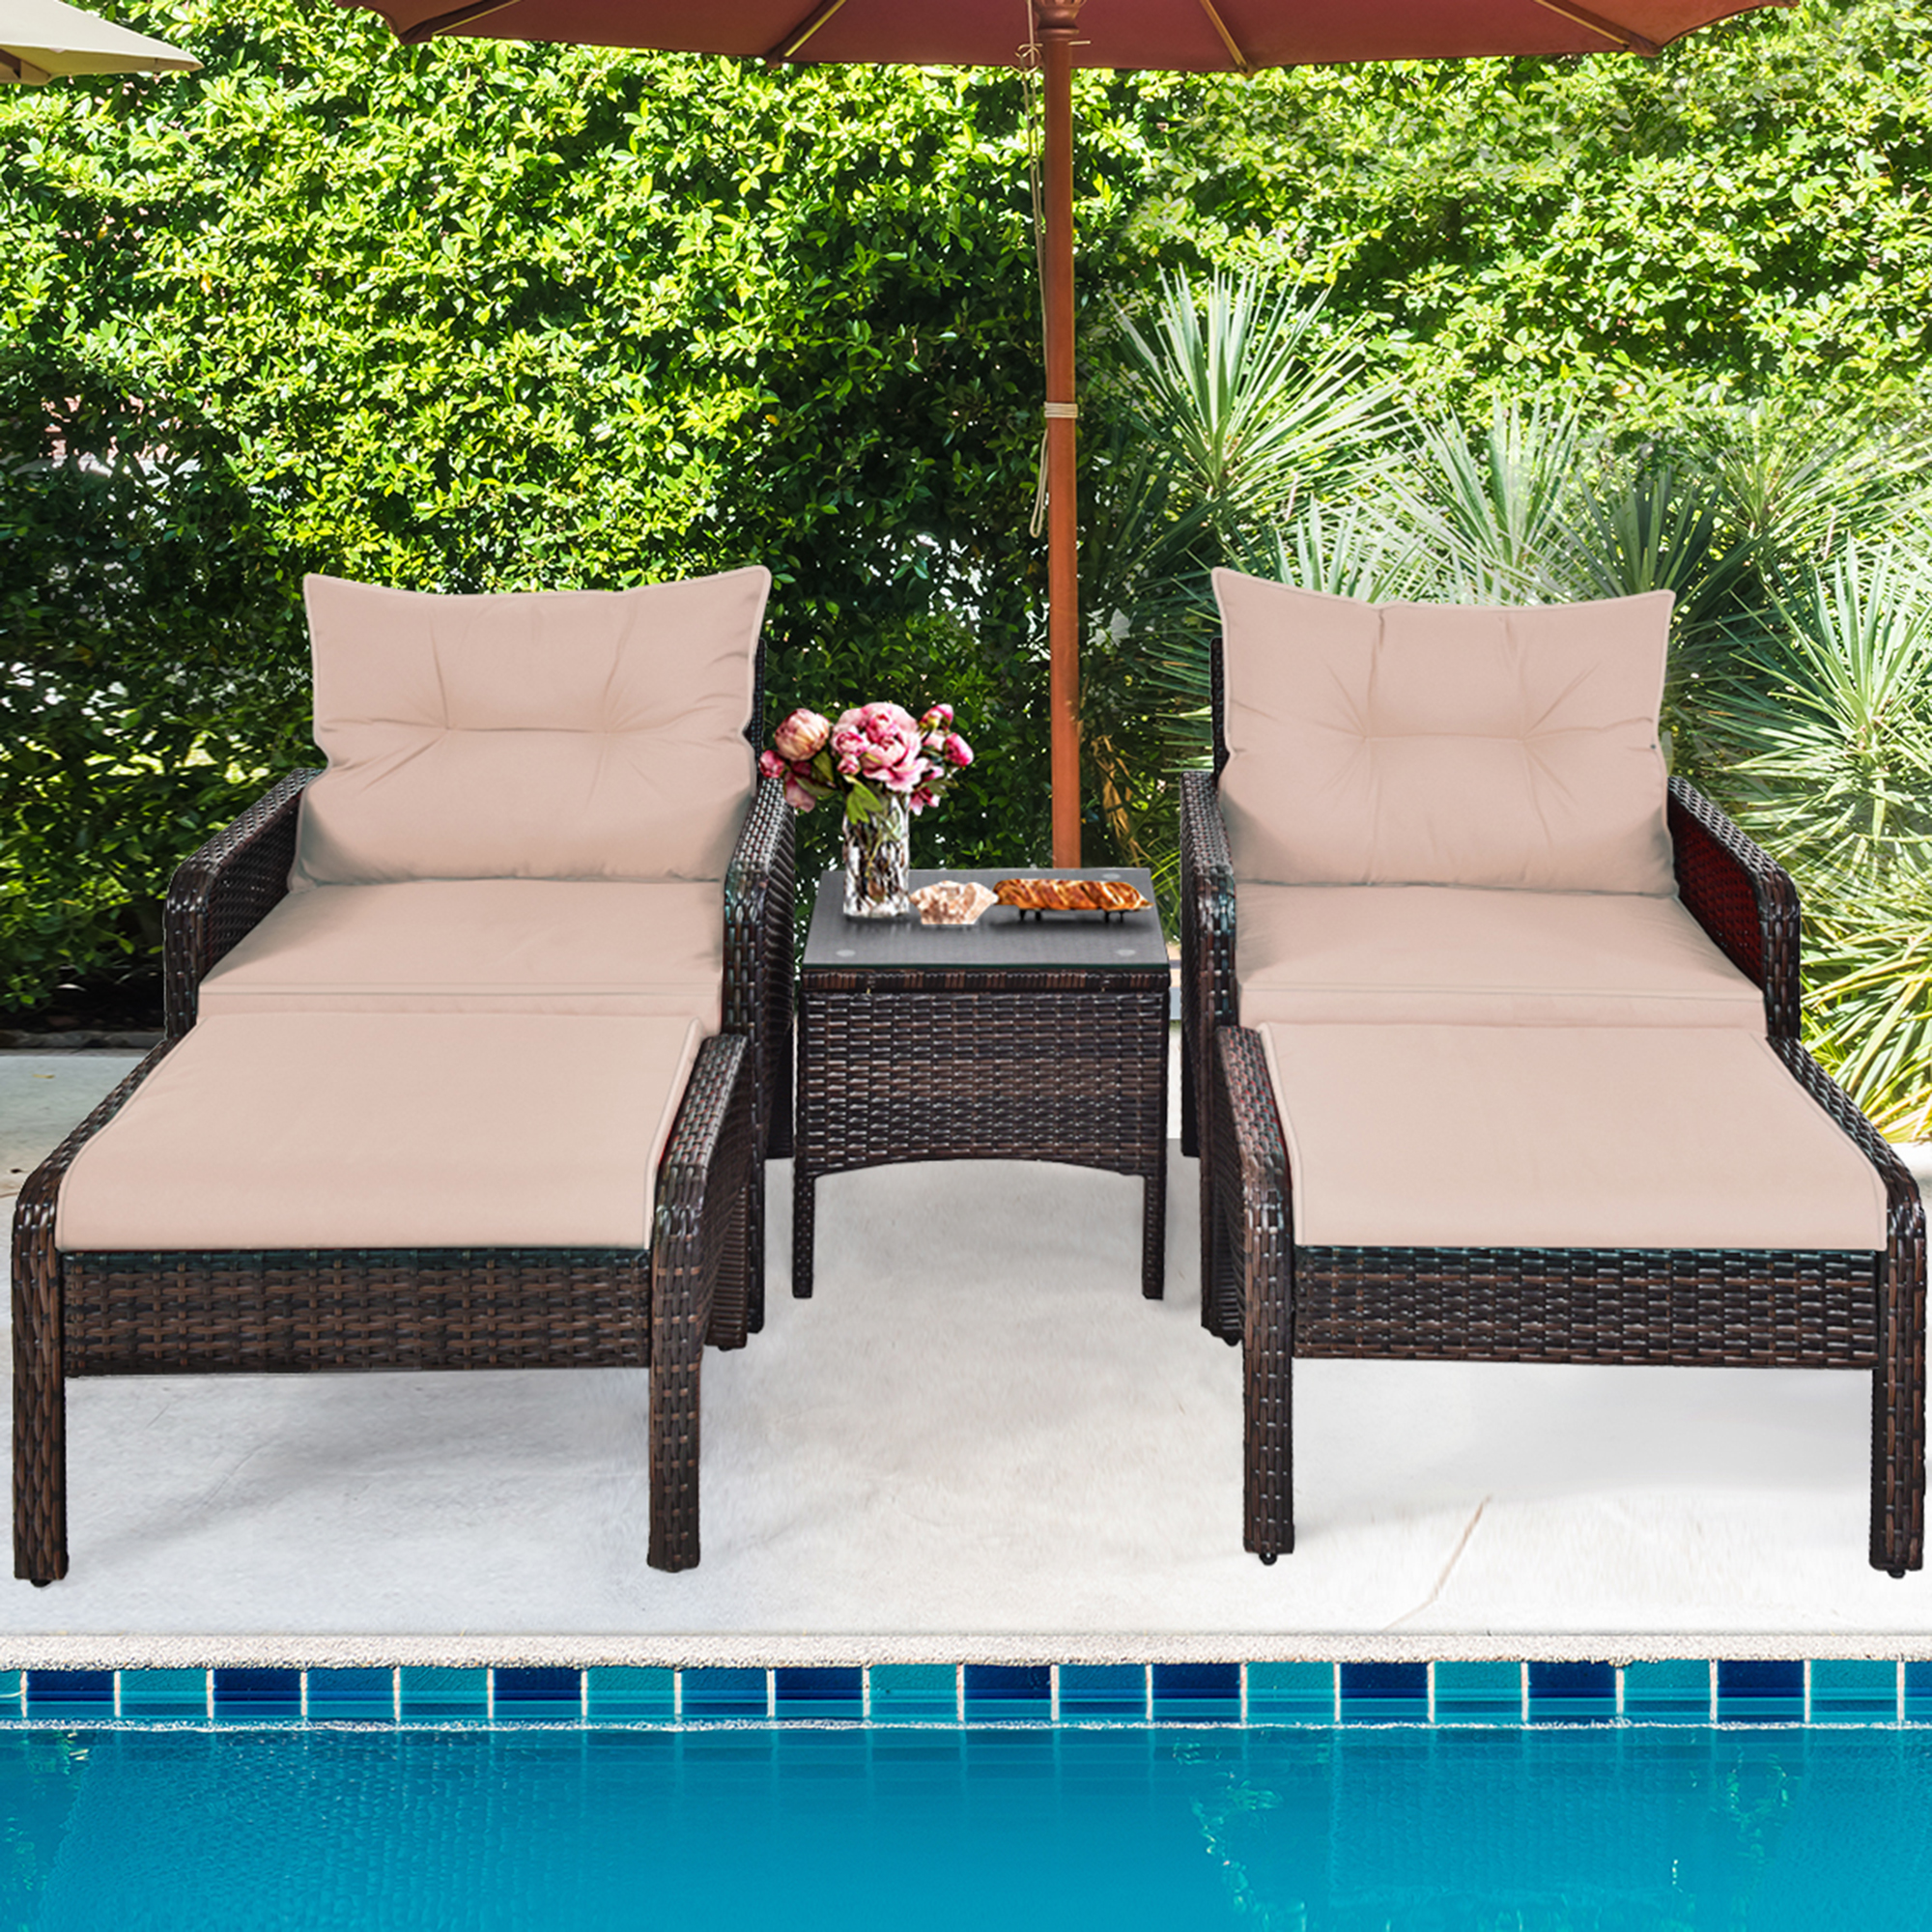 Gymax 5 PC Patio Set Sectional Rattan Wicker Furniture Set Home Outdoor - image 4 of 10